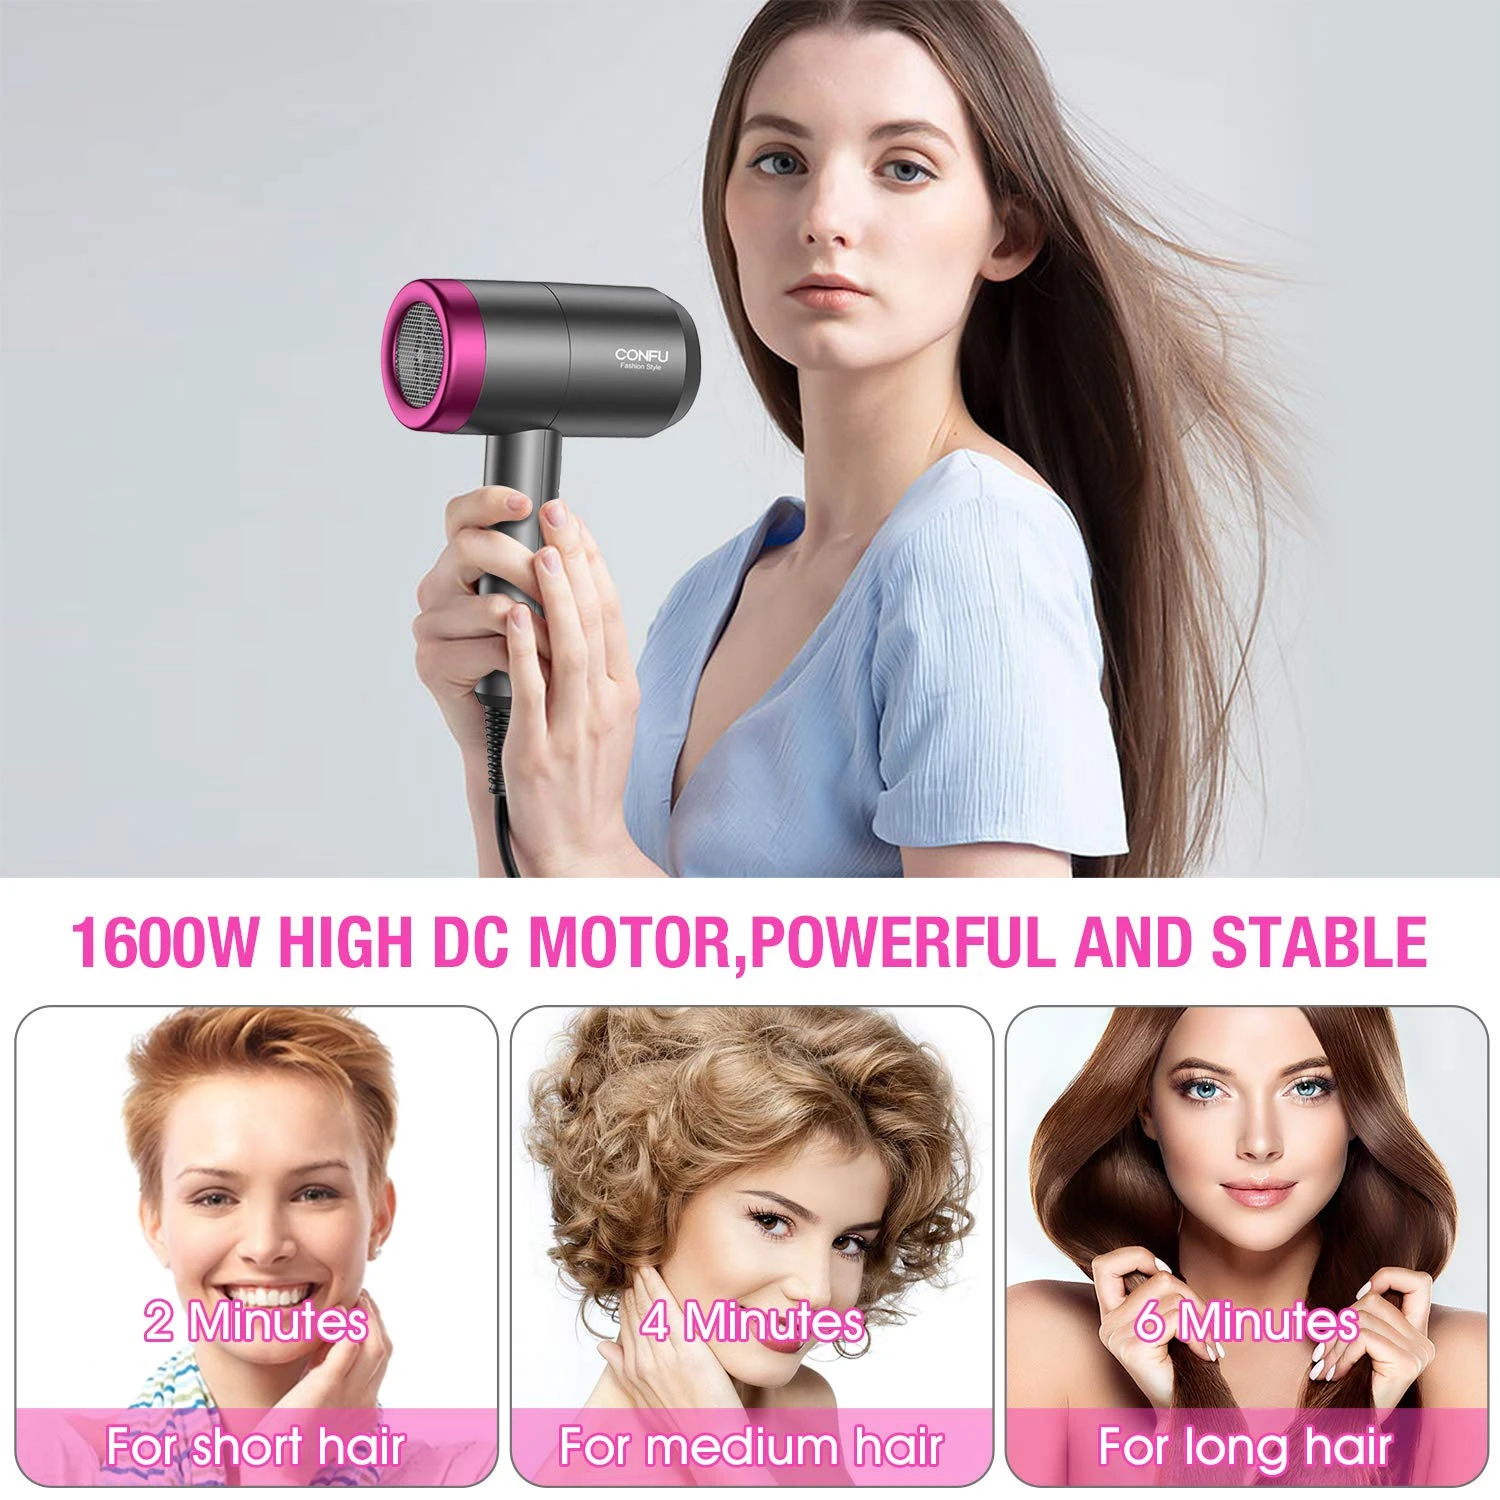 Hair Dryer 1800w Lightweight Inoic Blow Dryer With Infinite Speed Settings 3 Heat Settings Contain Nozzle And Diffuser